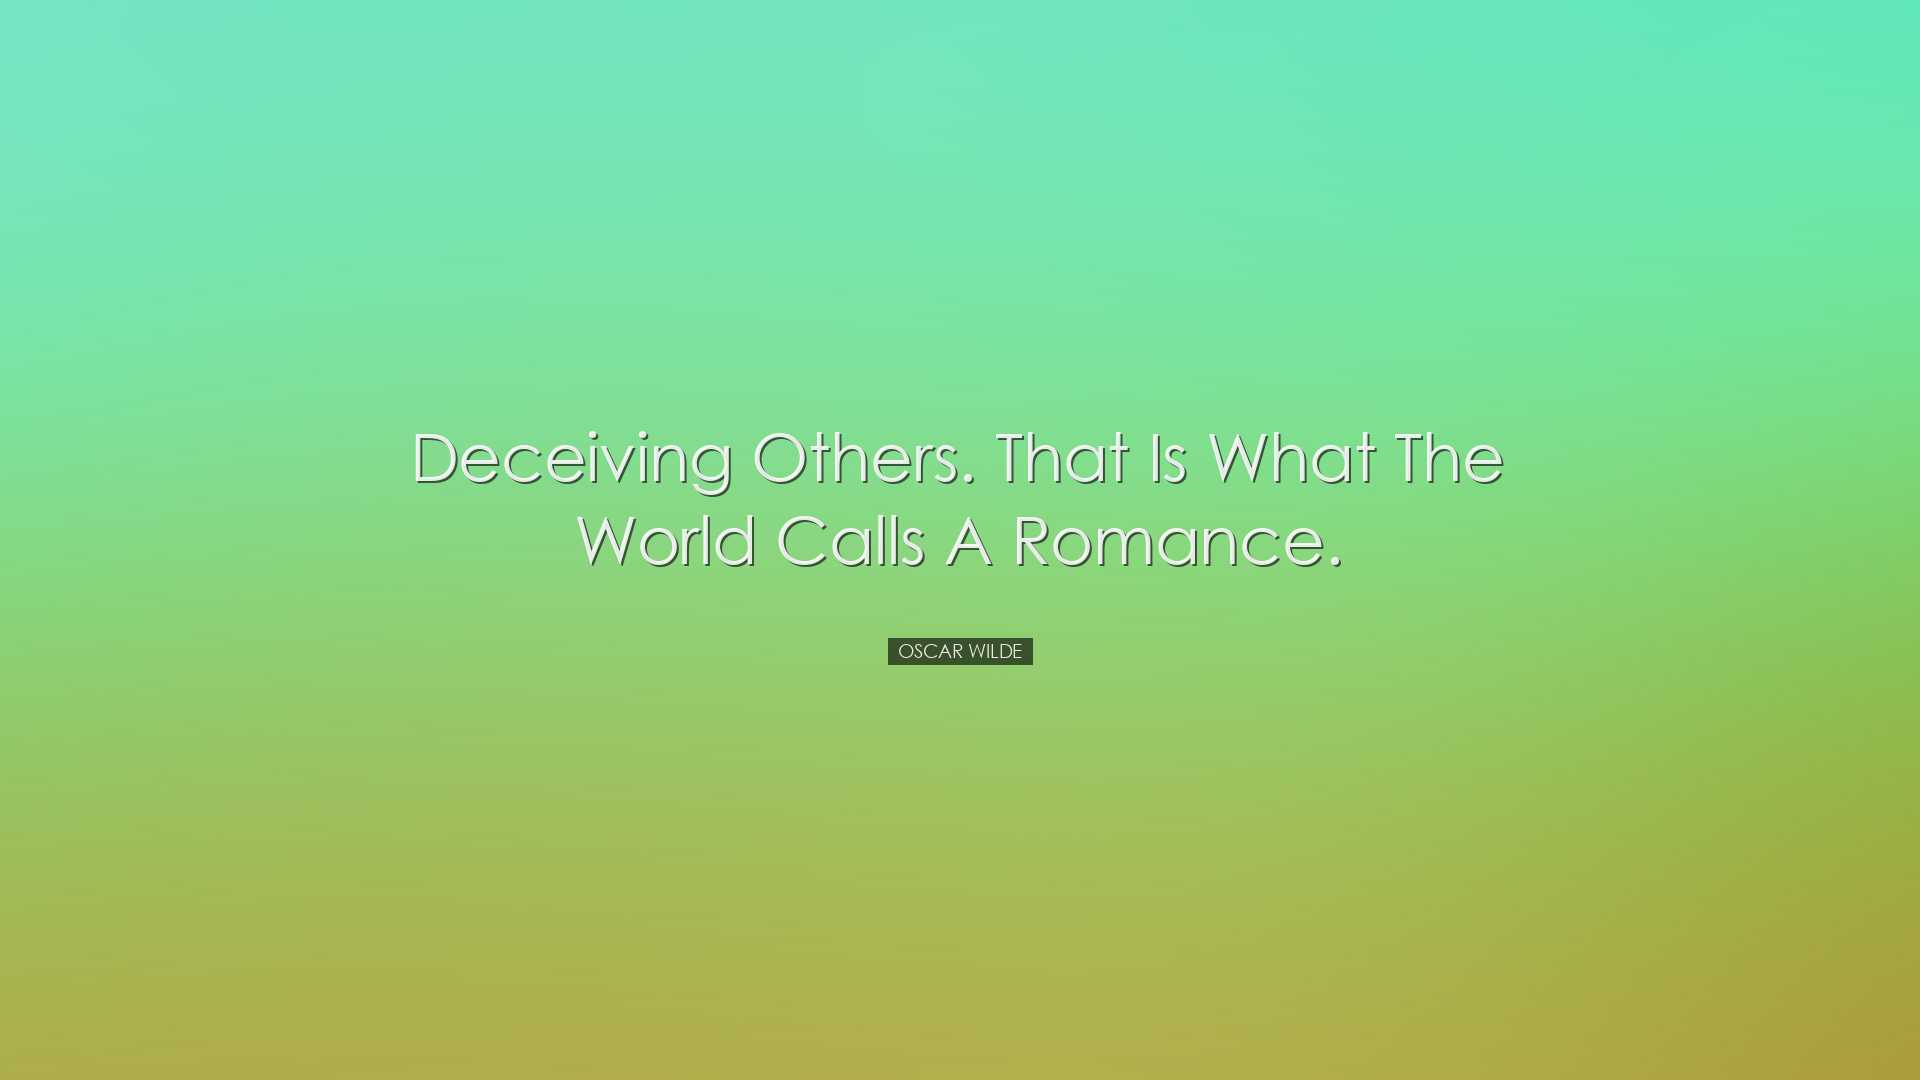 Deceiving others. That is what the world calls a romance. - Oscar